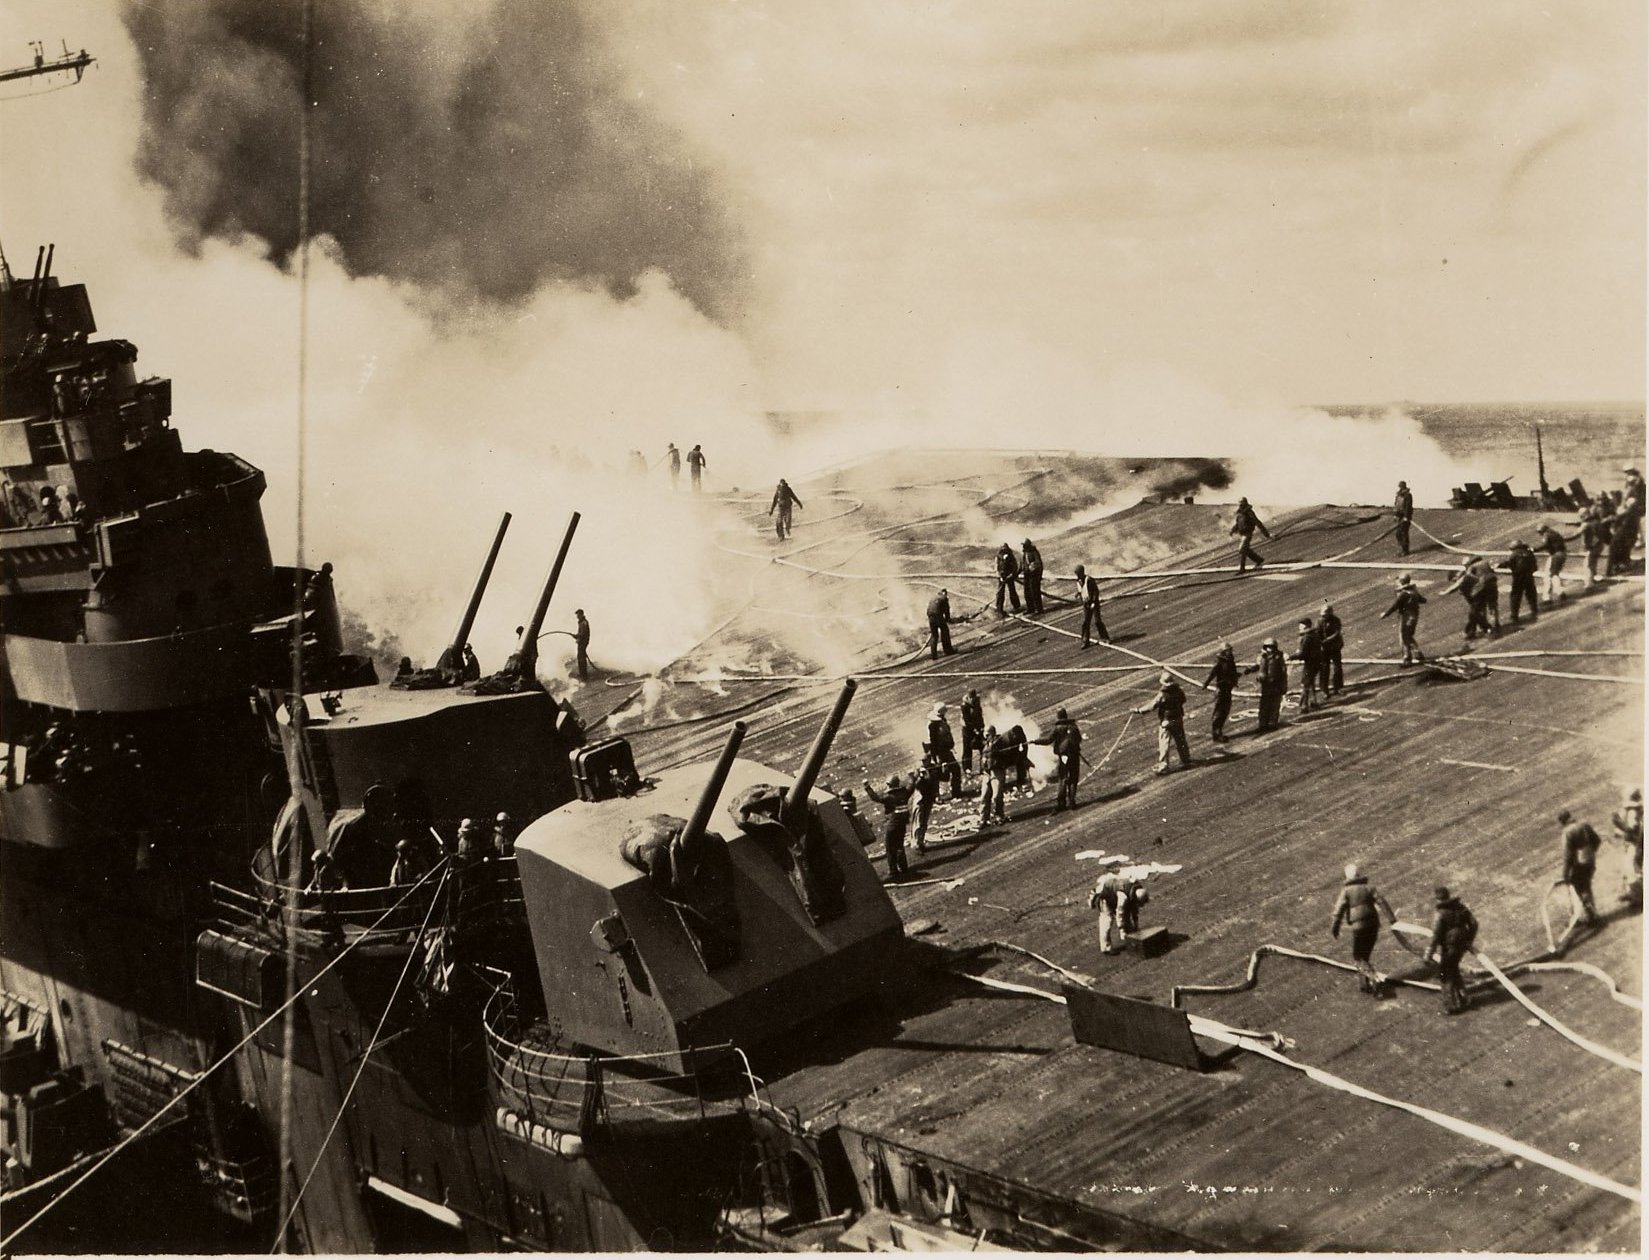 Sailors of the U.S.S. Franklin (CV-13) fight the fires ignited by a Japanese attack on March 19, 1945, Photo courtesy Patriots Point Naval & Maritime Museum, Mt. Pleasant, SC. 